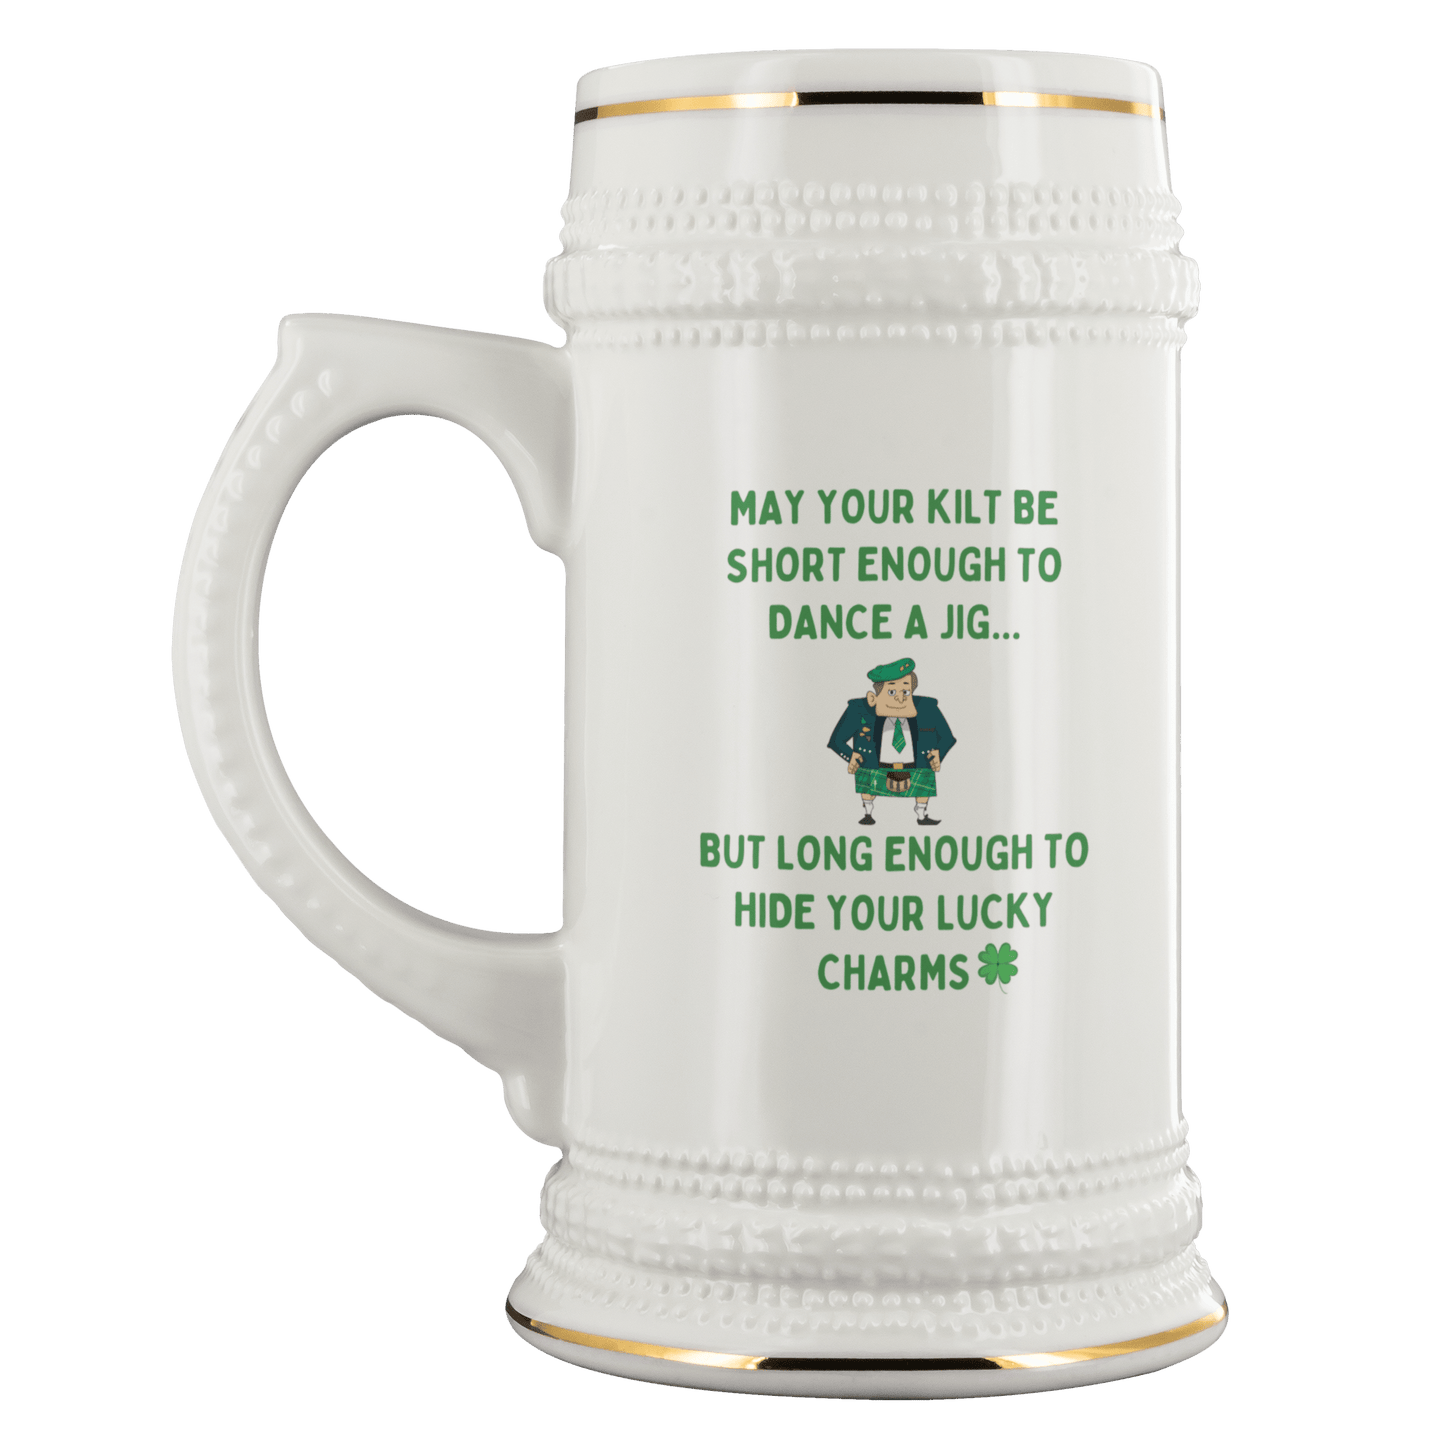 May Your Kilt Be Short Enough To Dance a Jig - Beer Stein